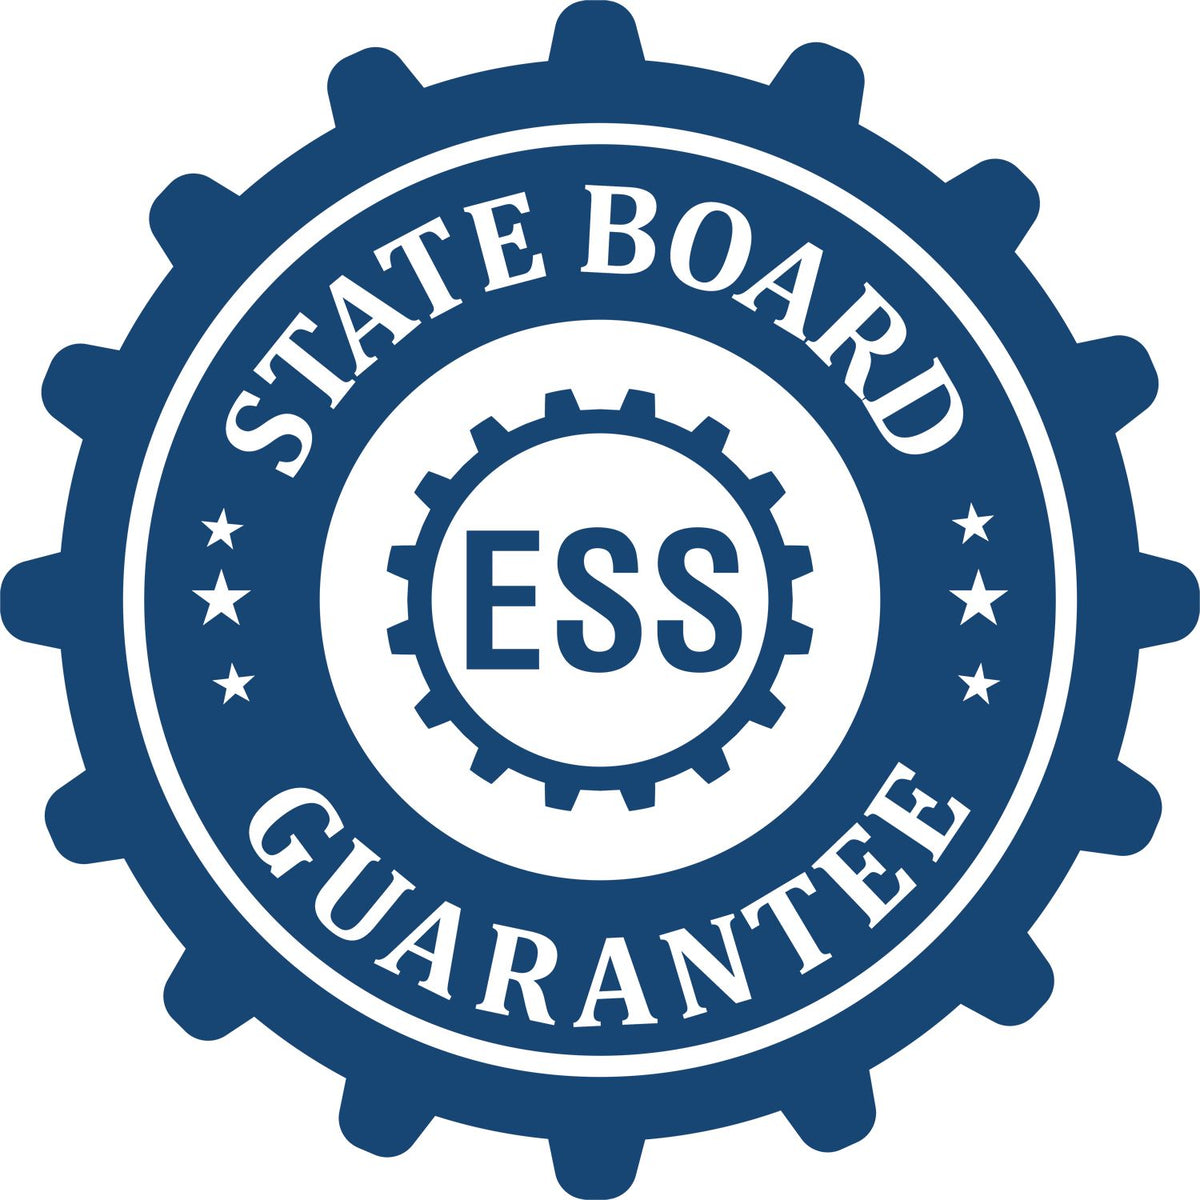 An emblem in a gear shape illustrating a state board guarantee for the Premium MaxLight Pre-Inked Maryland Landscape Architects Stamp product.